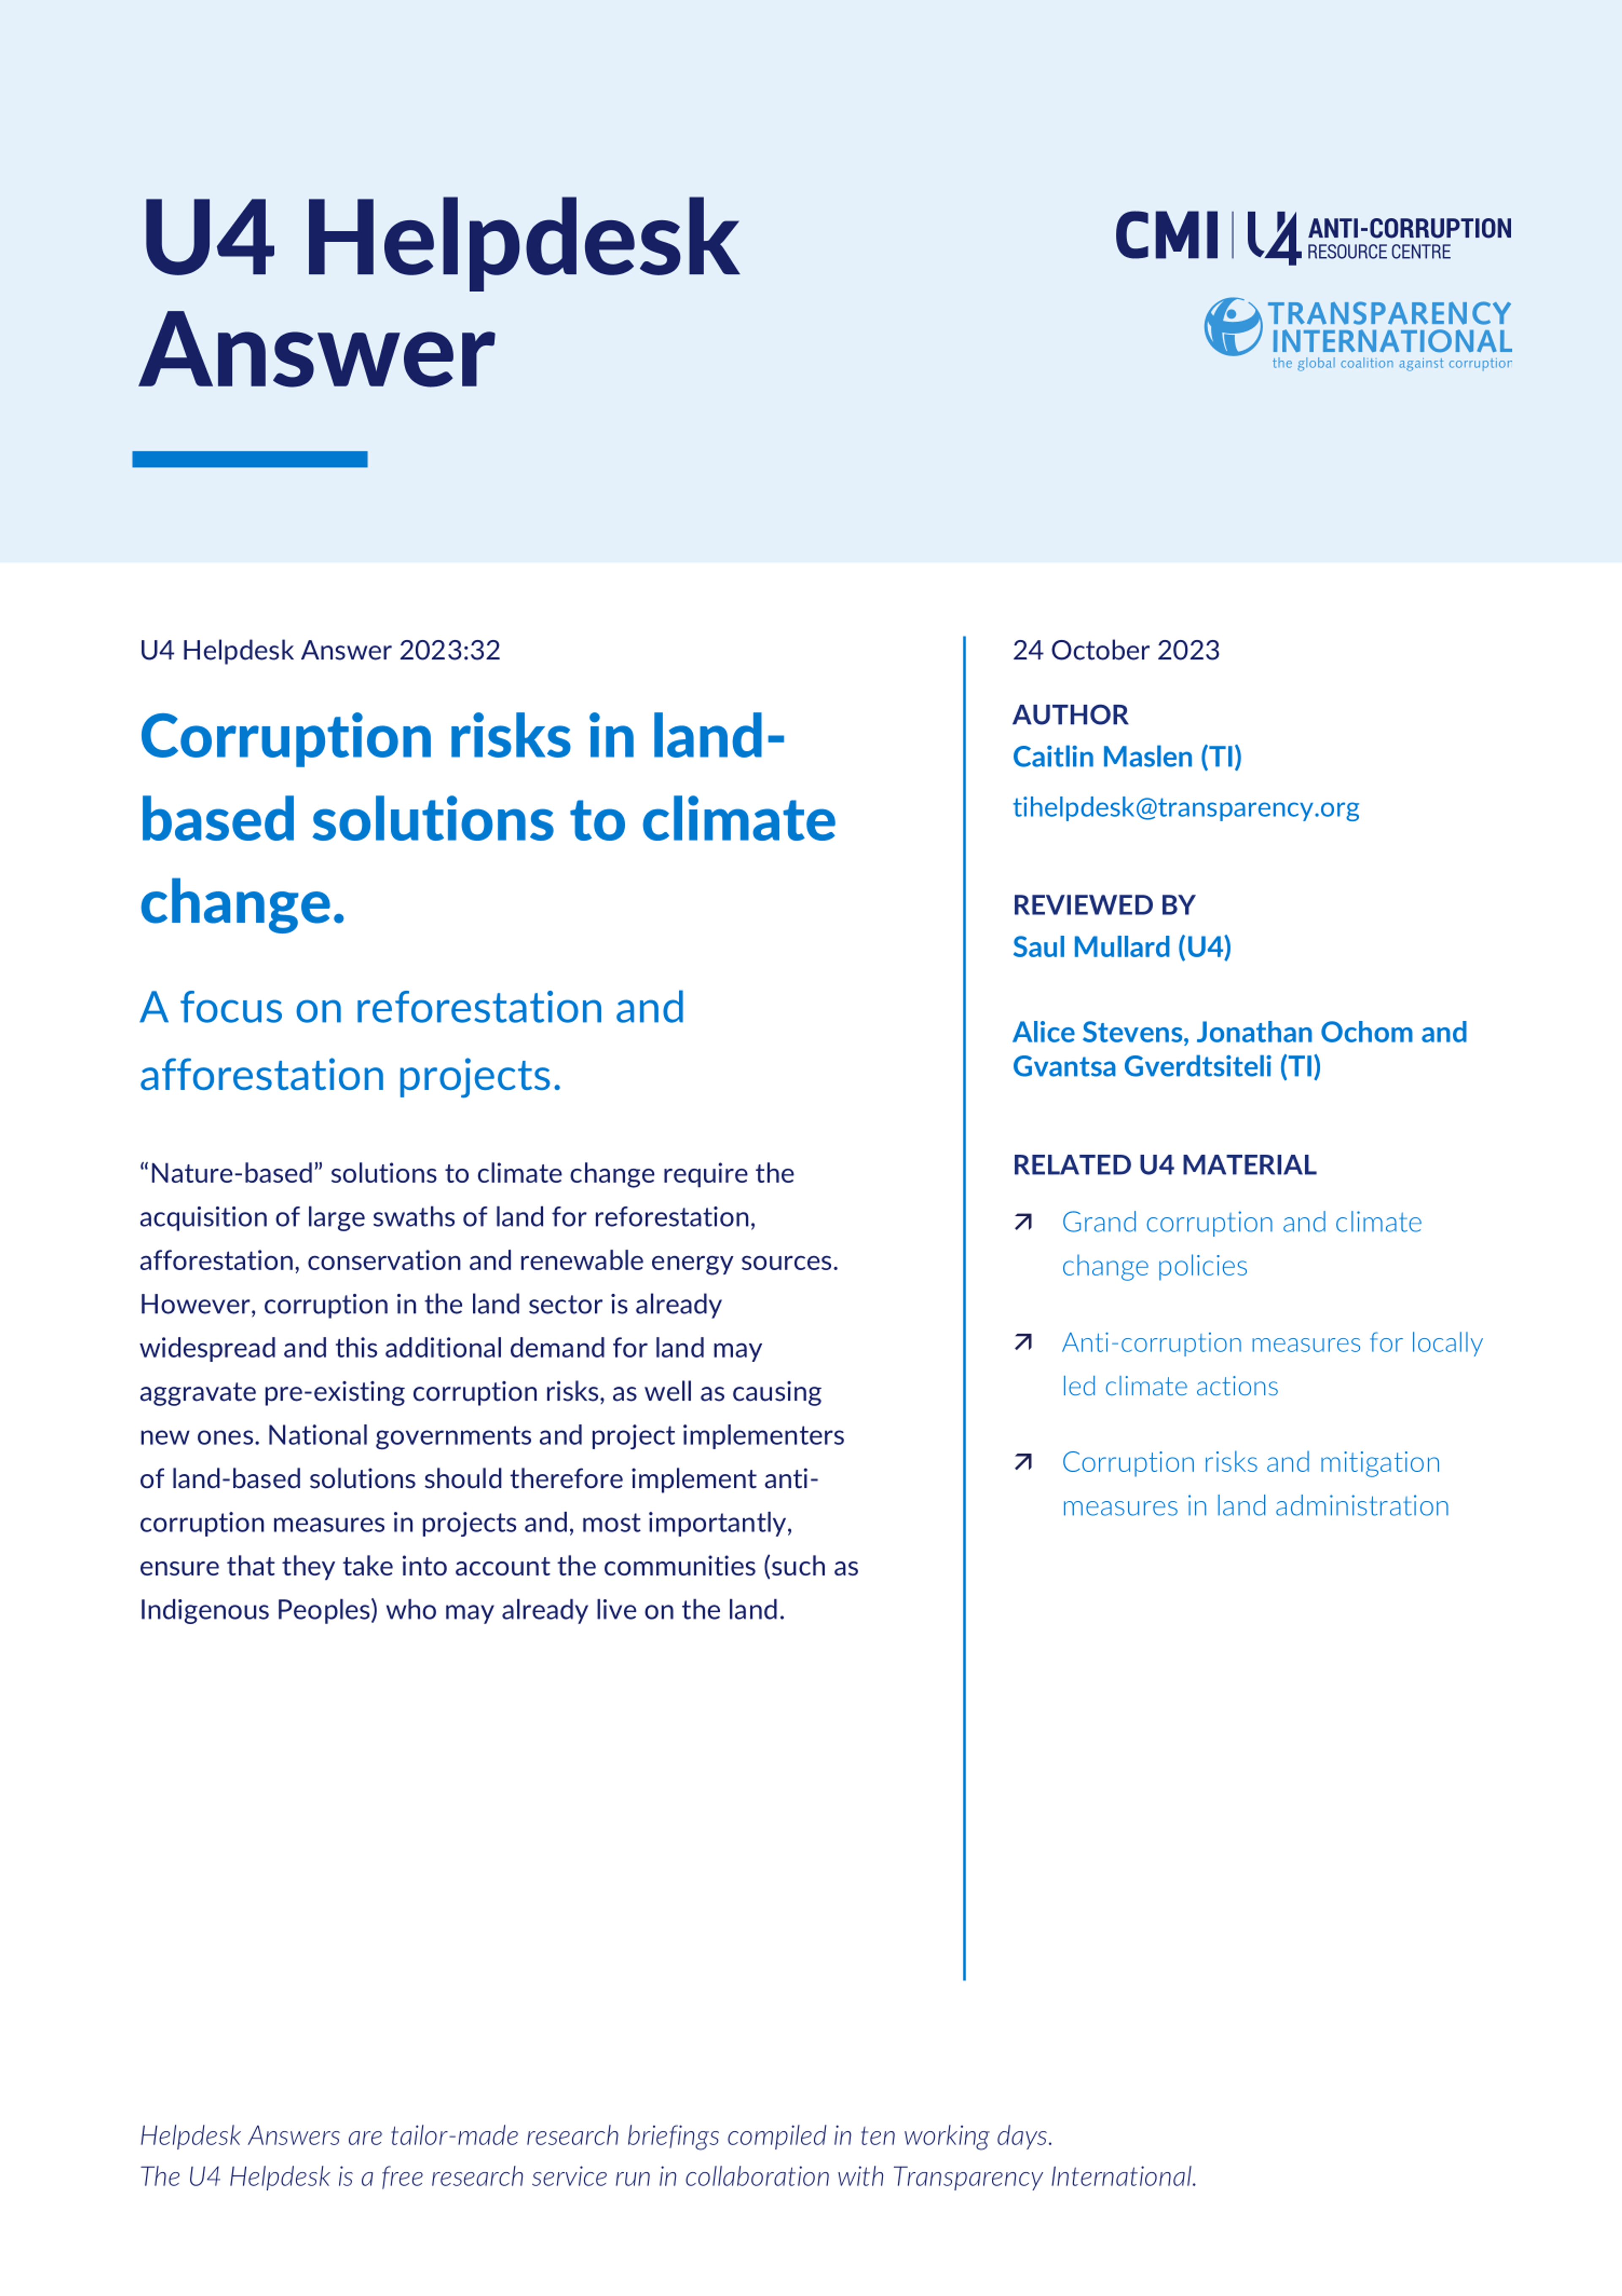 Corruption risks in land-based solutions to climate change.